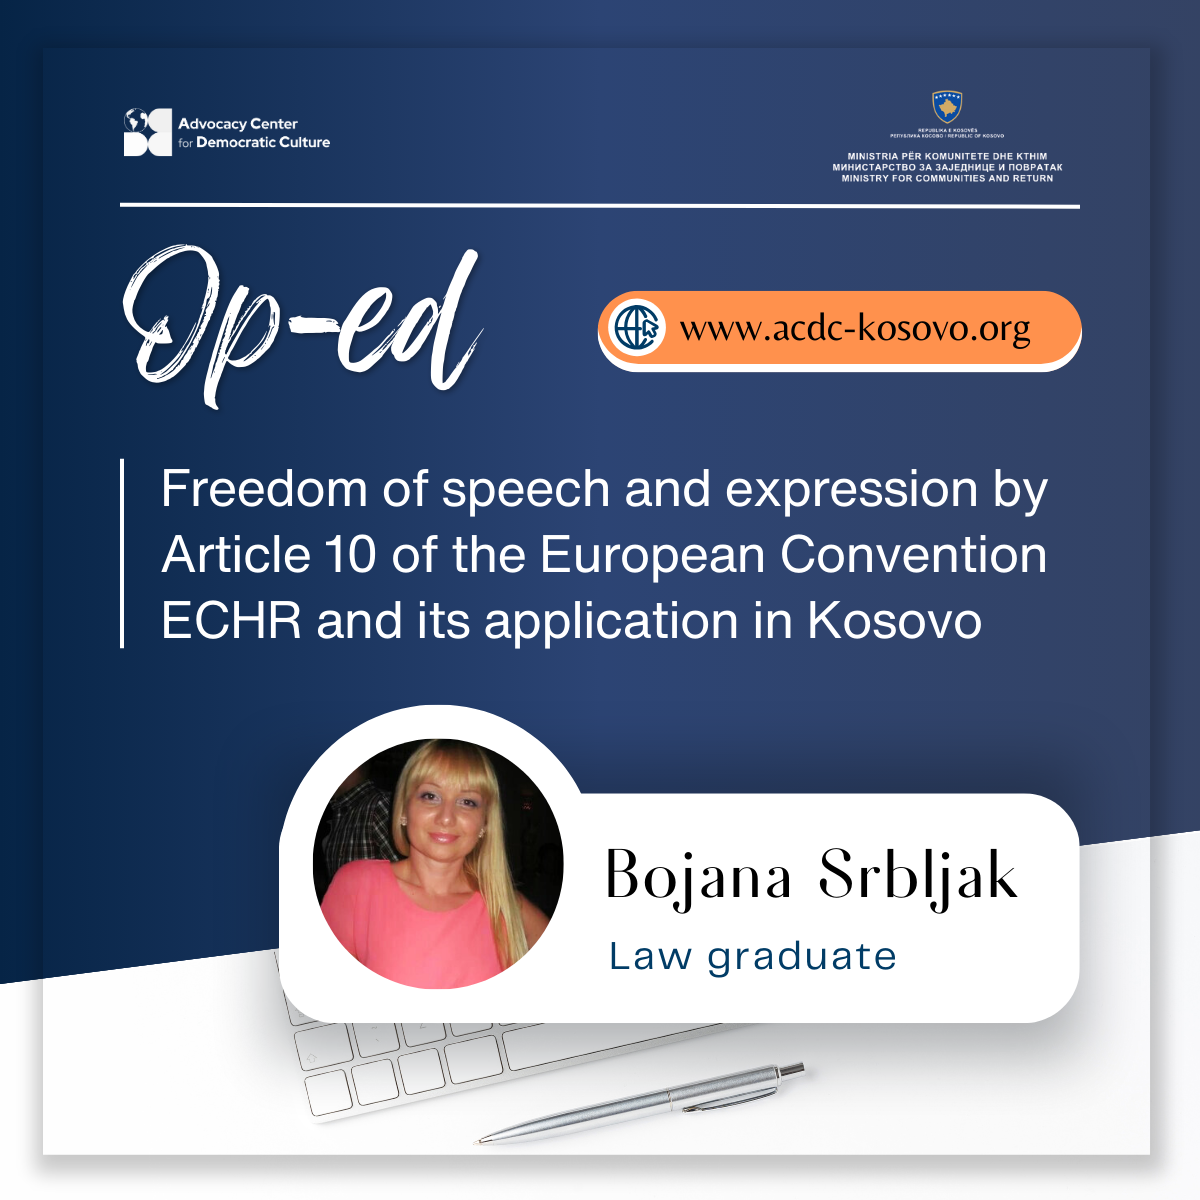 op-ed-freedom-of-speech-and-expression-by-the-article-10-european-convention-echr-and-its-practice-in-kosovo